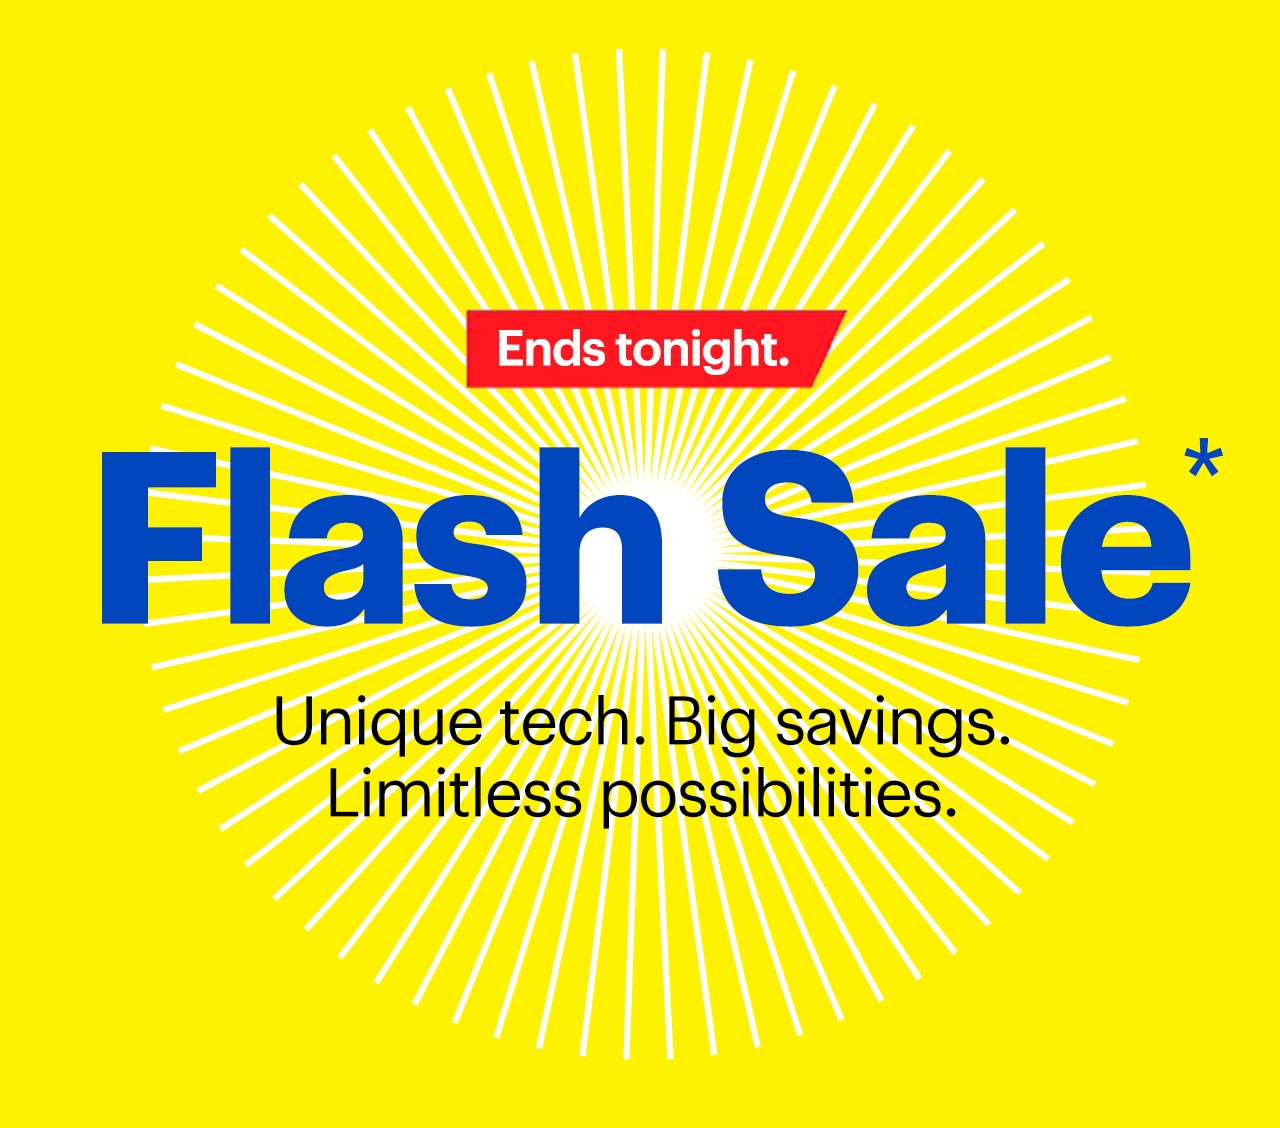 Flash Sale. Endless savings for a limited time. Ends tonight. Reference disclaimer.